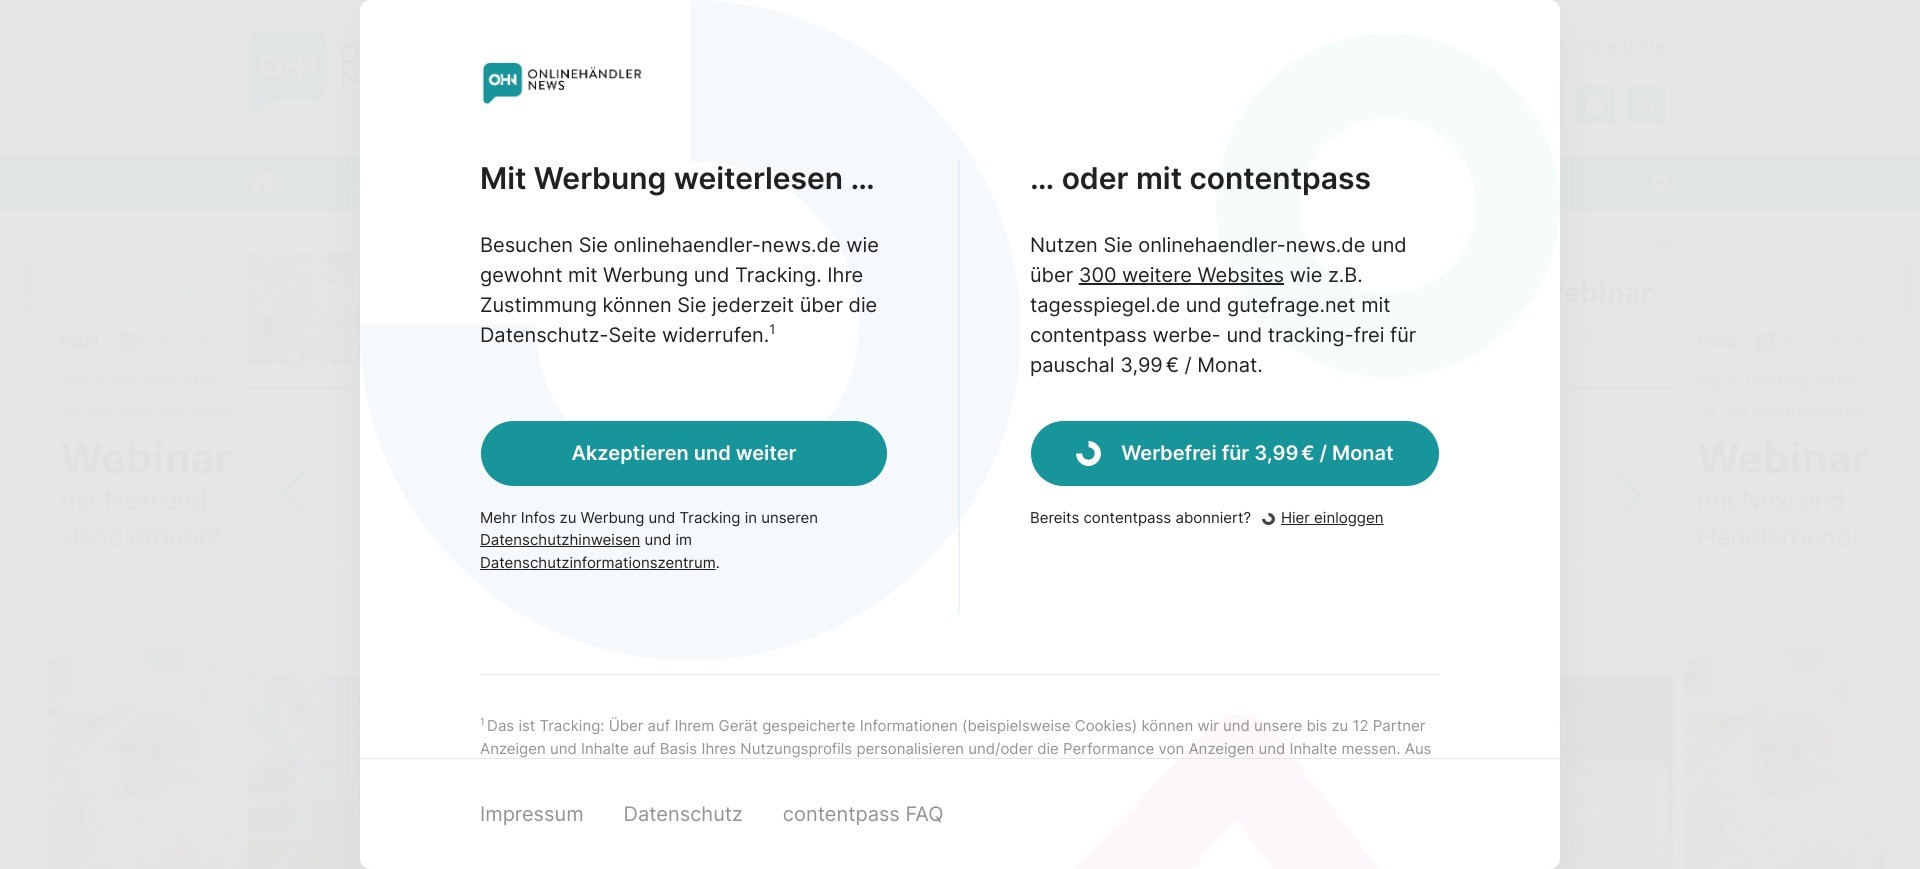 Screenshot of https://www.onlinehaendler-news.de/ displaying the choice of free reading with ads on the left hand side vs. an ad-free subscription of 3.99 euro per month on the right